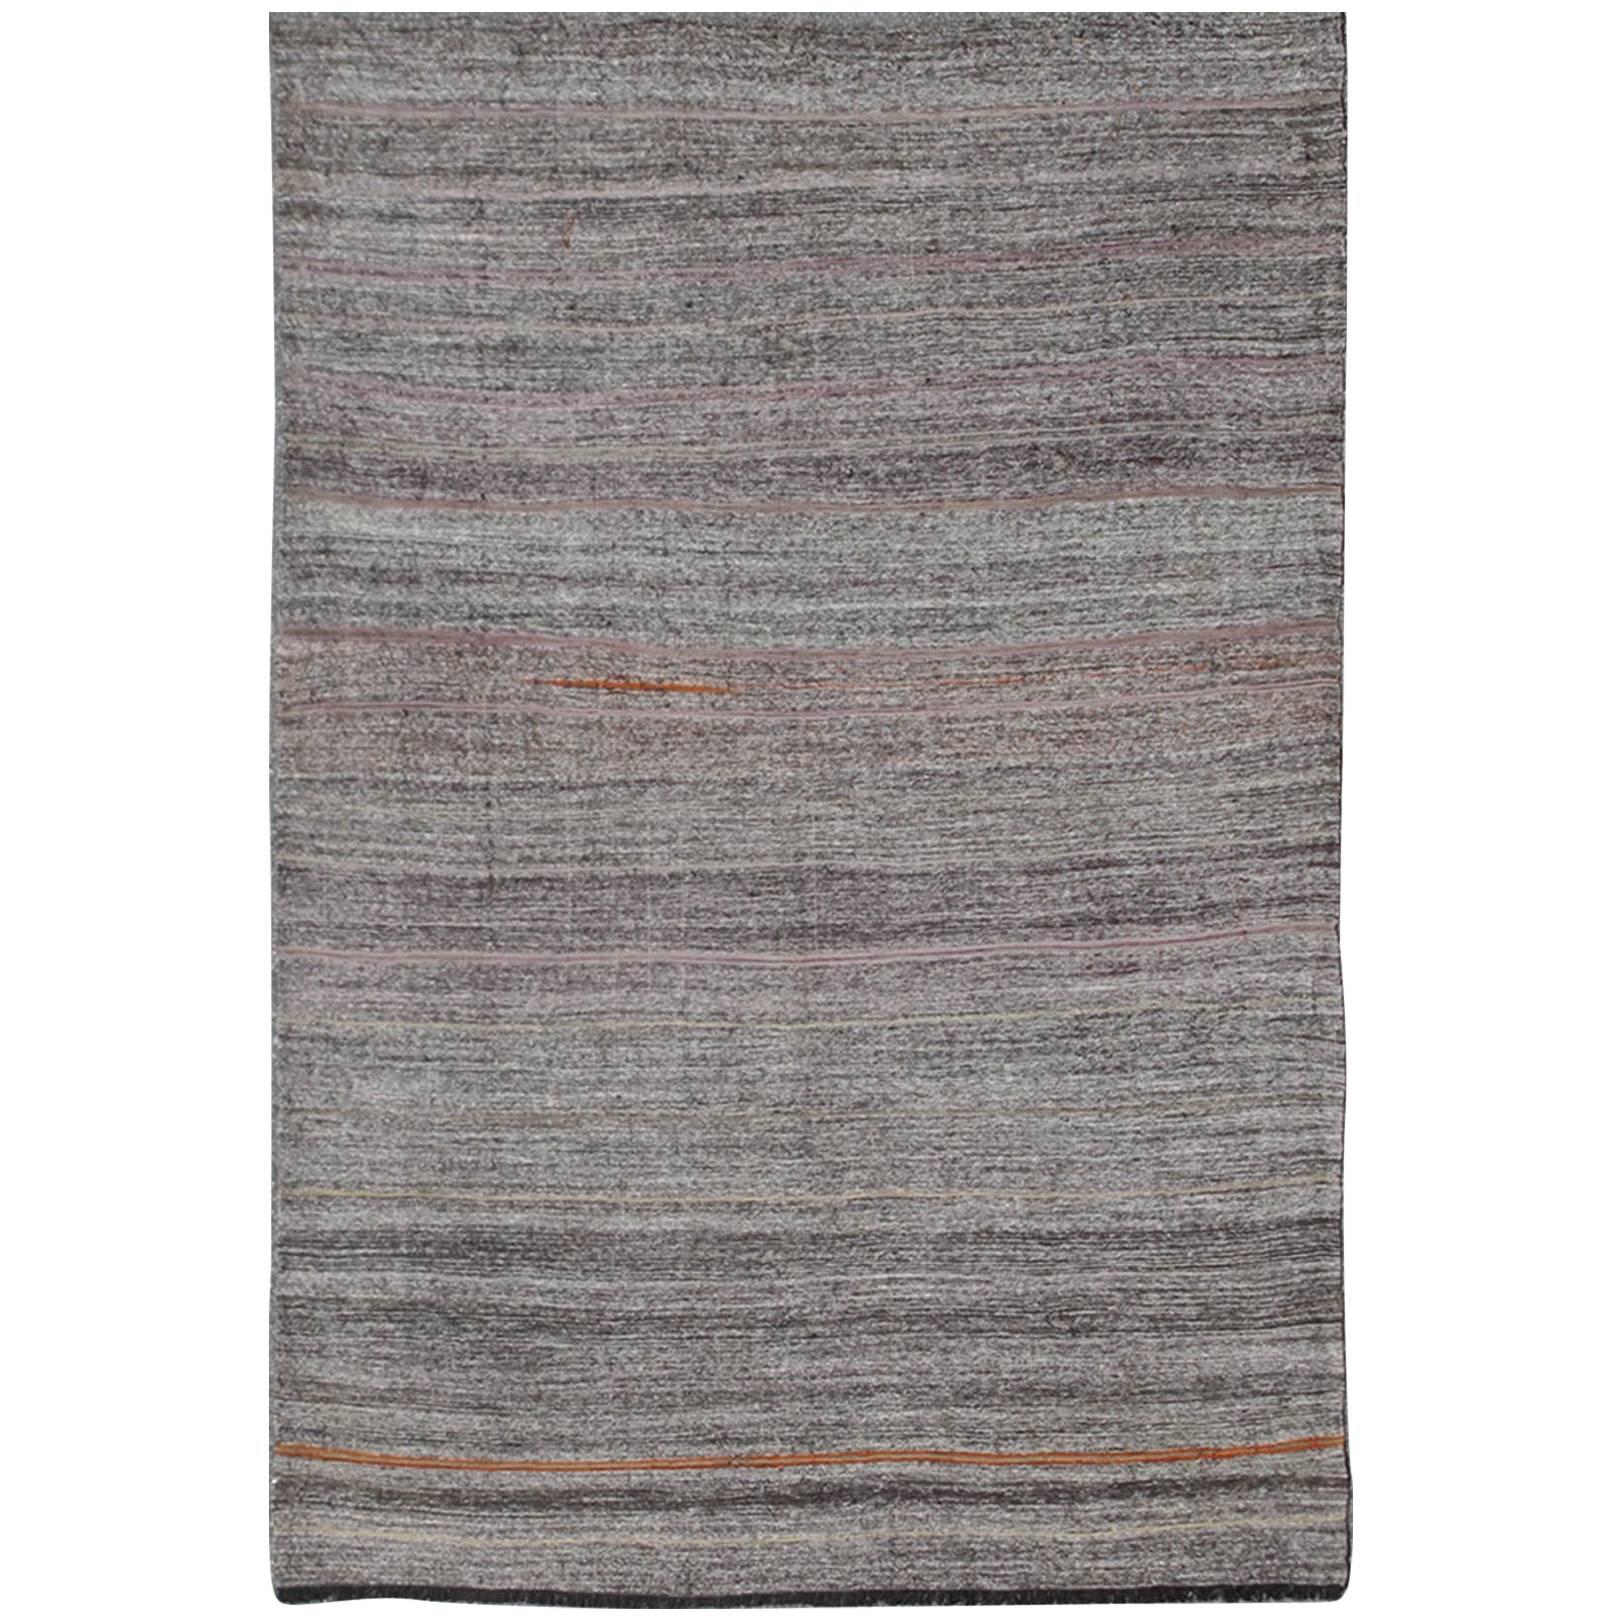 Vintage Turkish Kilim Rug with Variegated Stripes in Charcoal, Gray and Orange